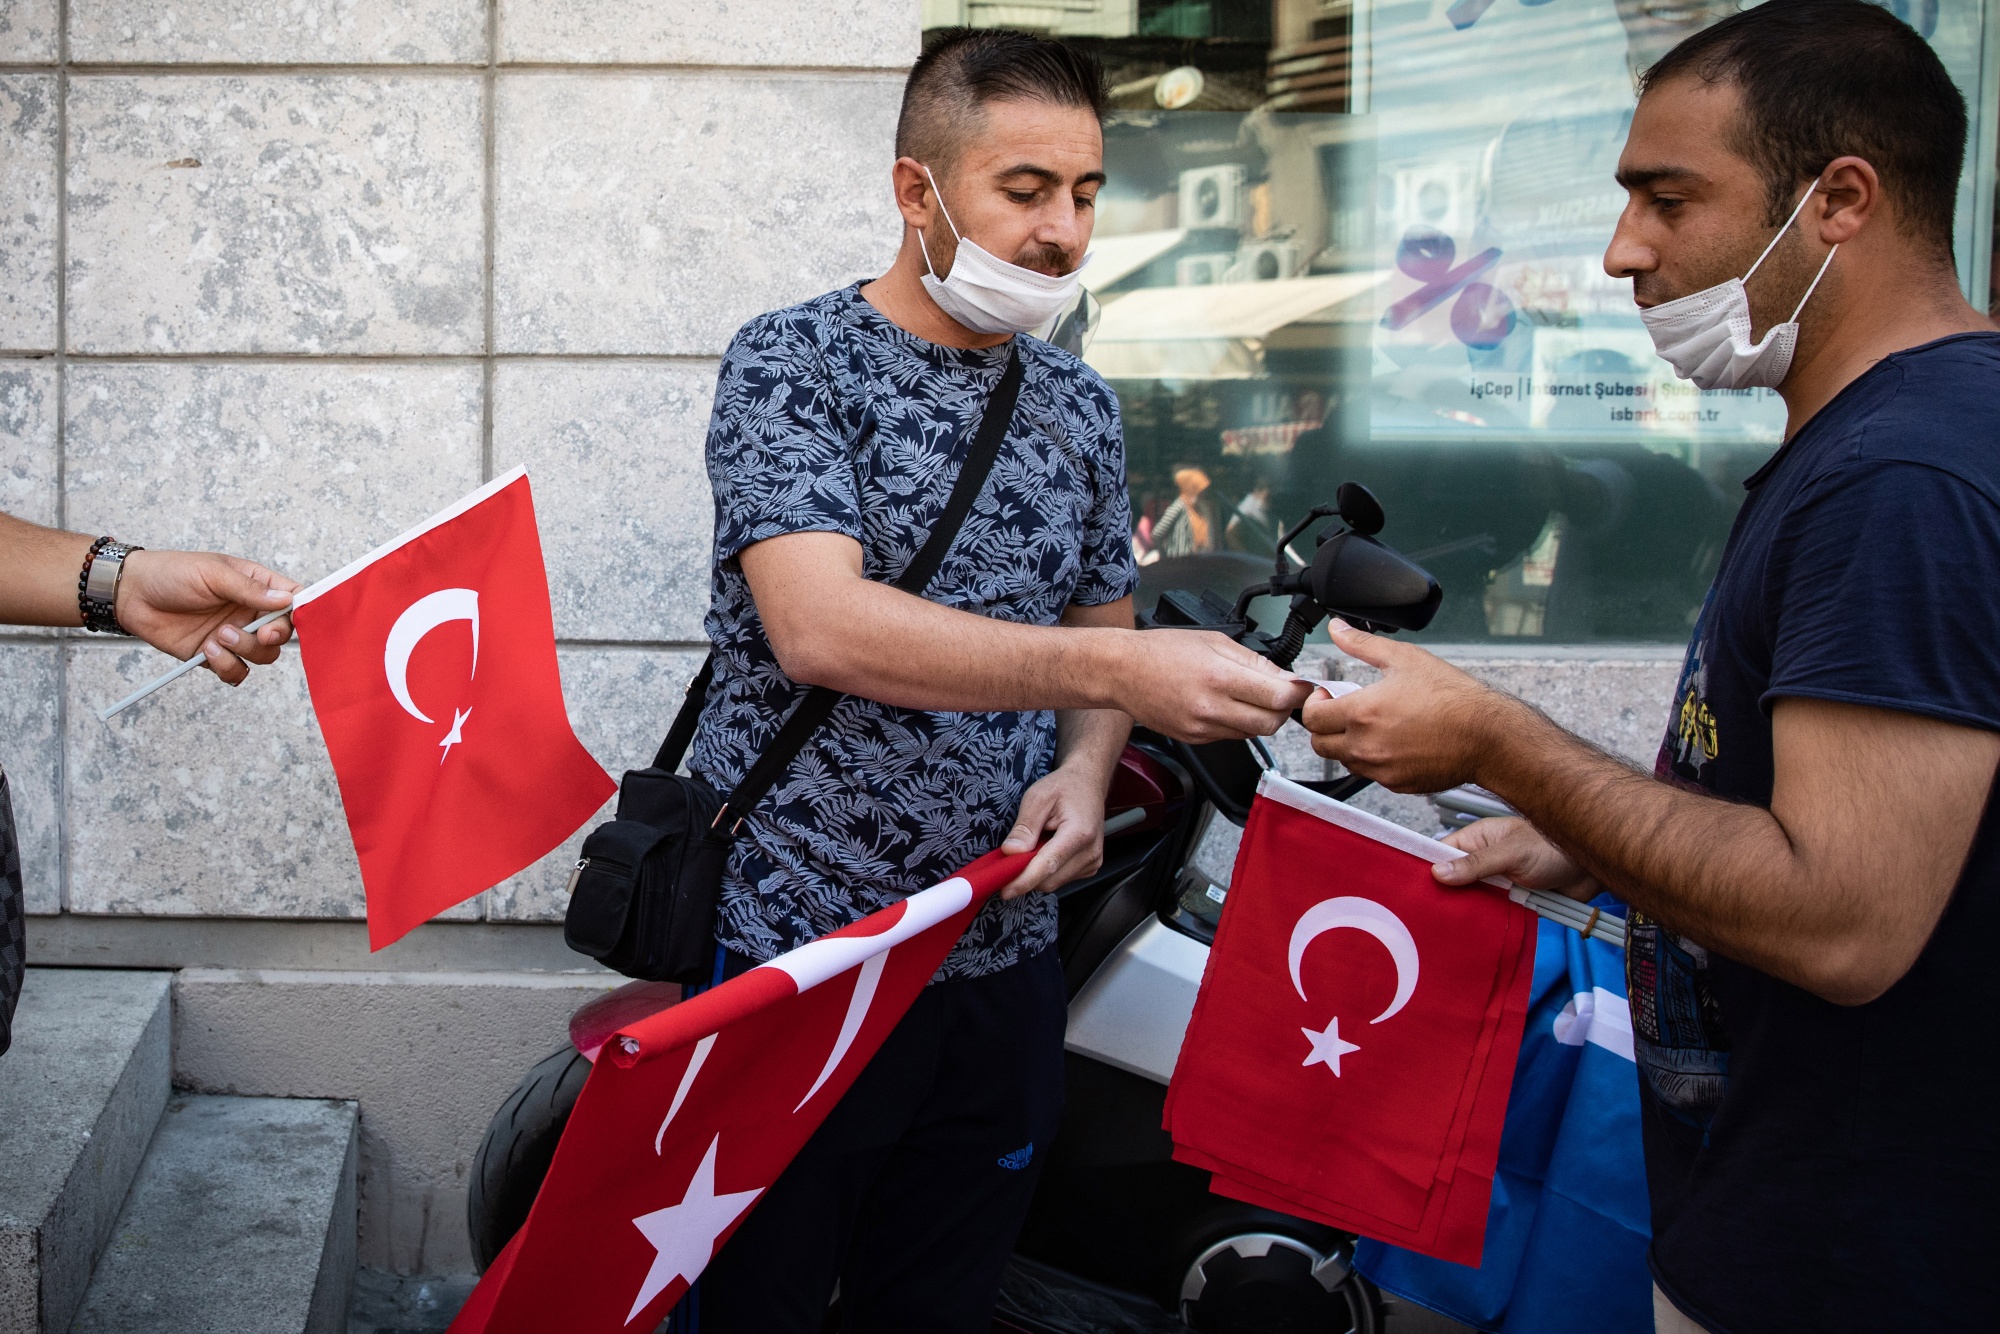 A street vendor sells Turkish national flags in the Eminonu district of Istanbul.